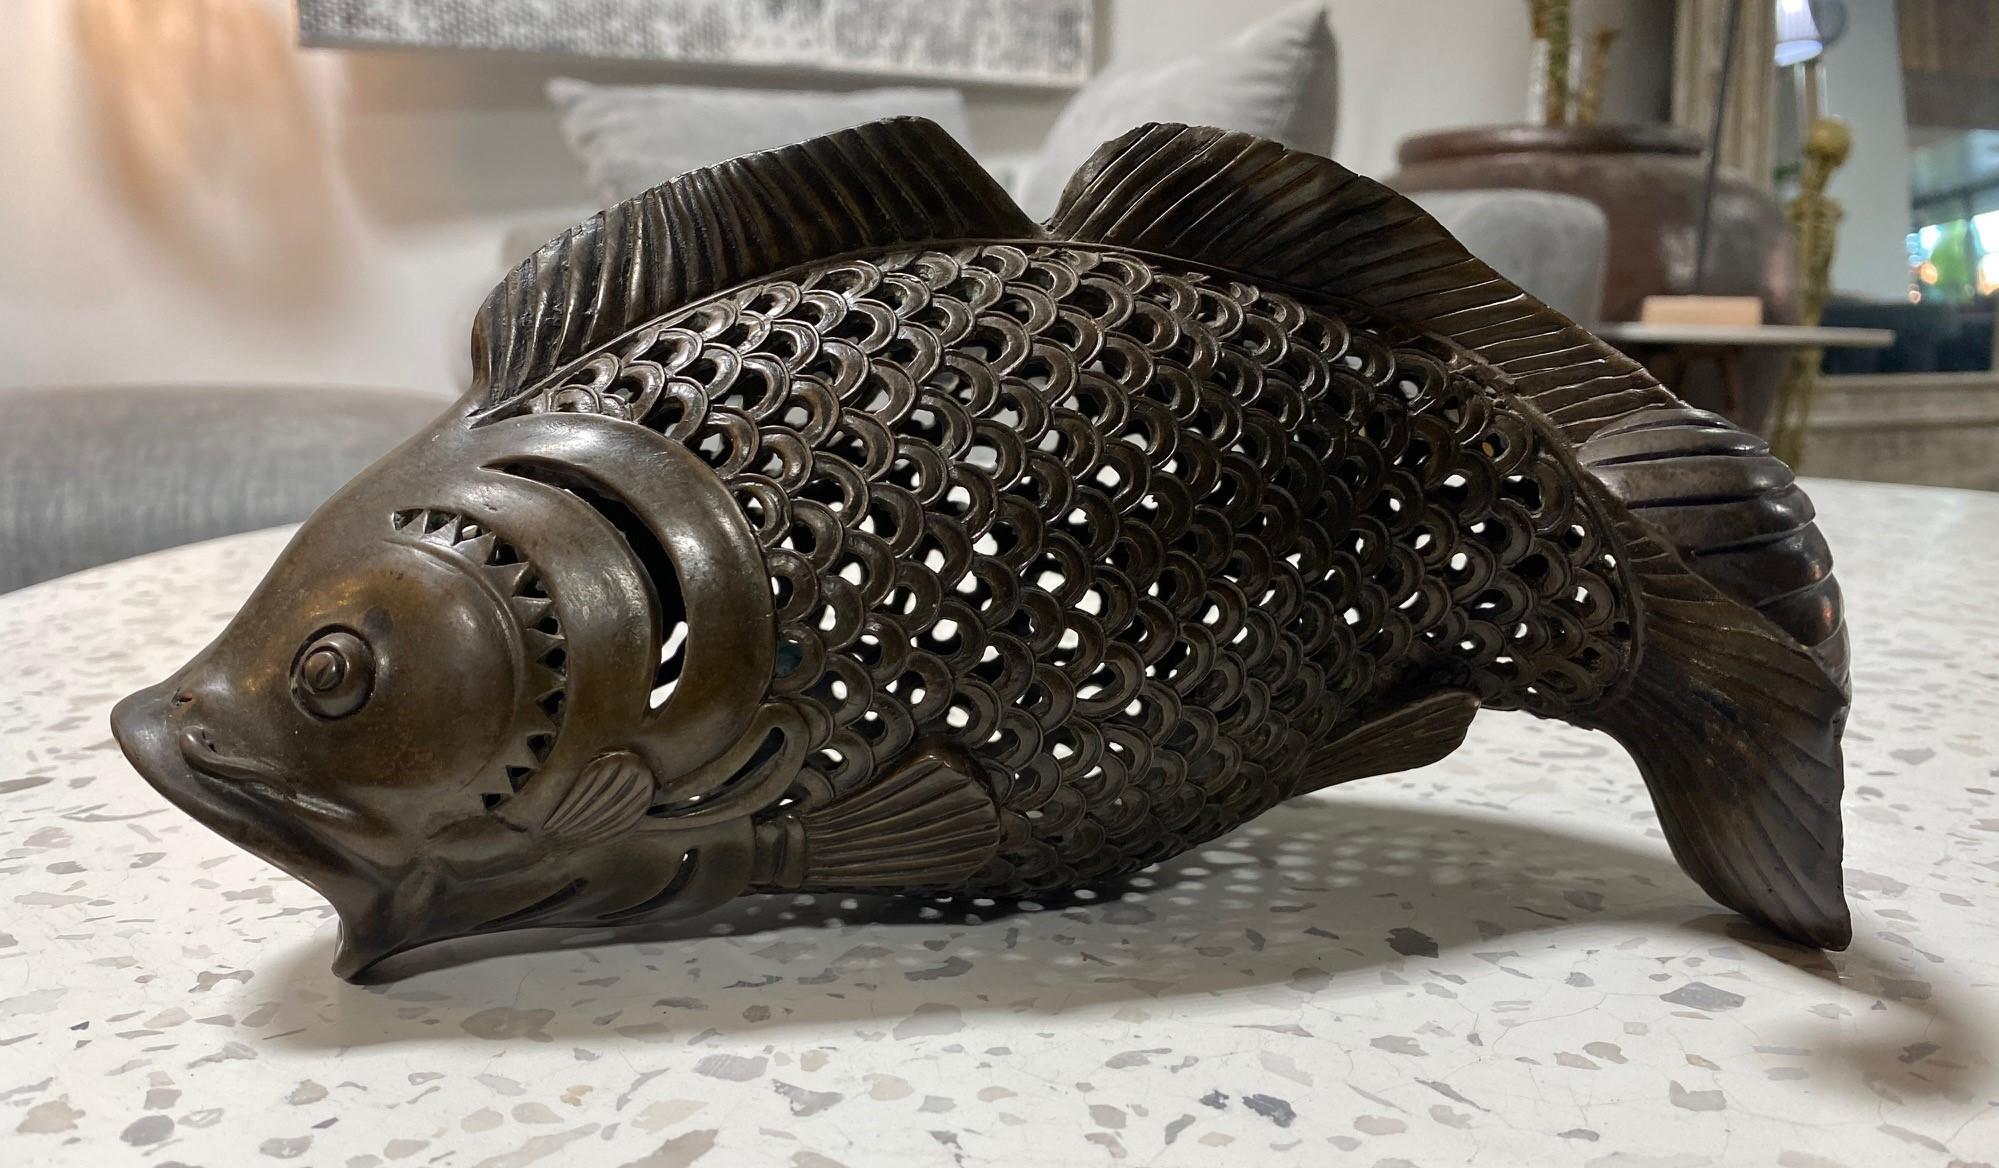 A beautiful Japanese bronze koi fish sculpture with wonderful mesh craftsmanship and a glowing patina. 

This piece may have initially been made to use as an incense burner or decorative hanging ornament in a traditional Japanese kitchen/ Irori